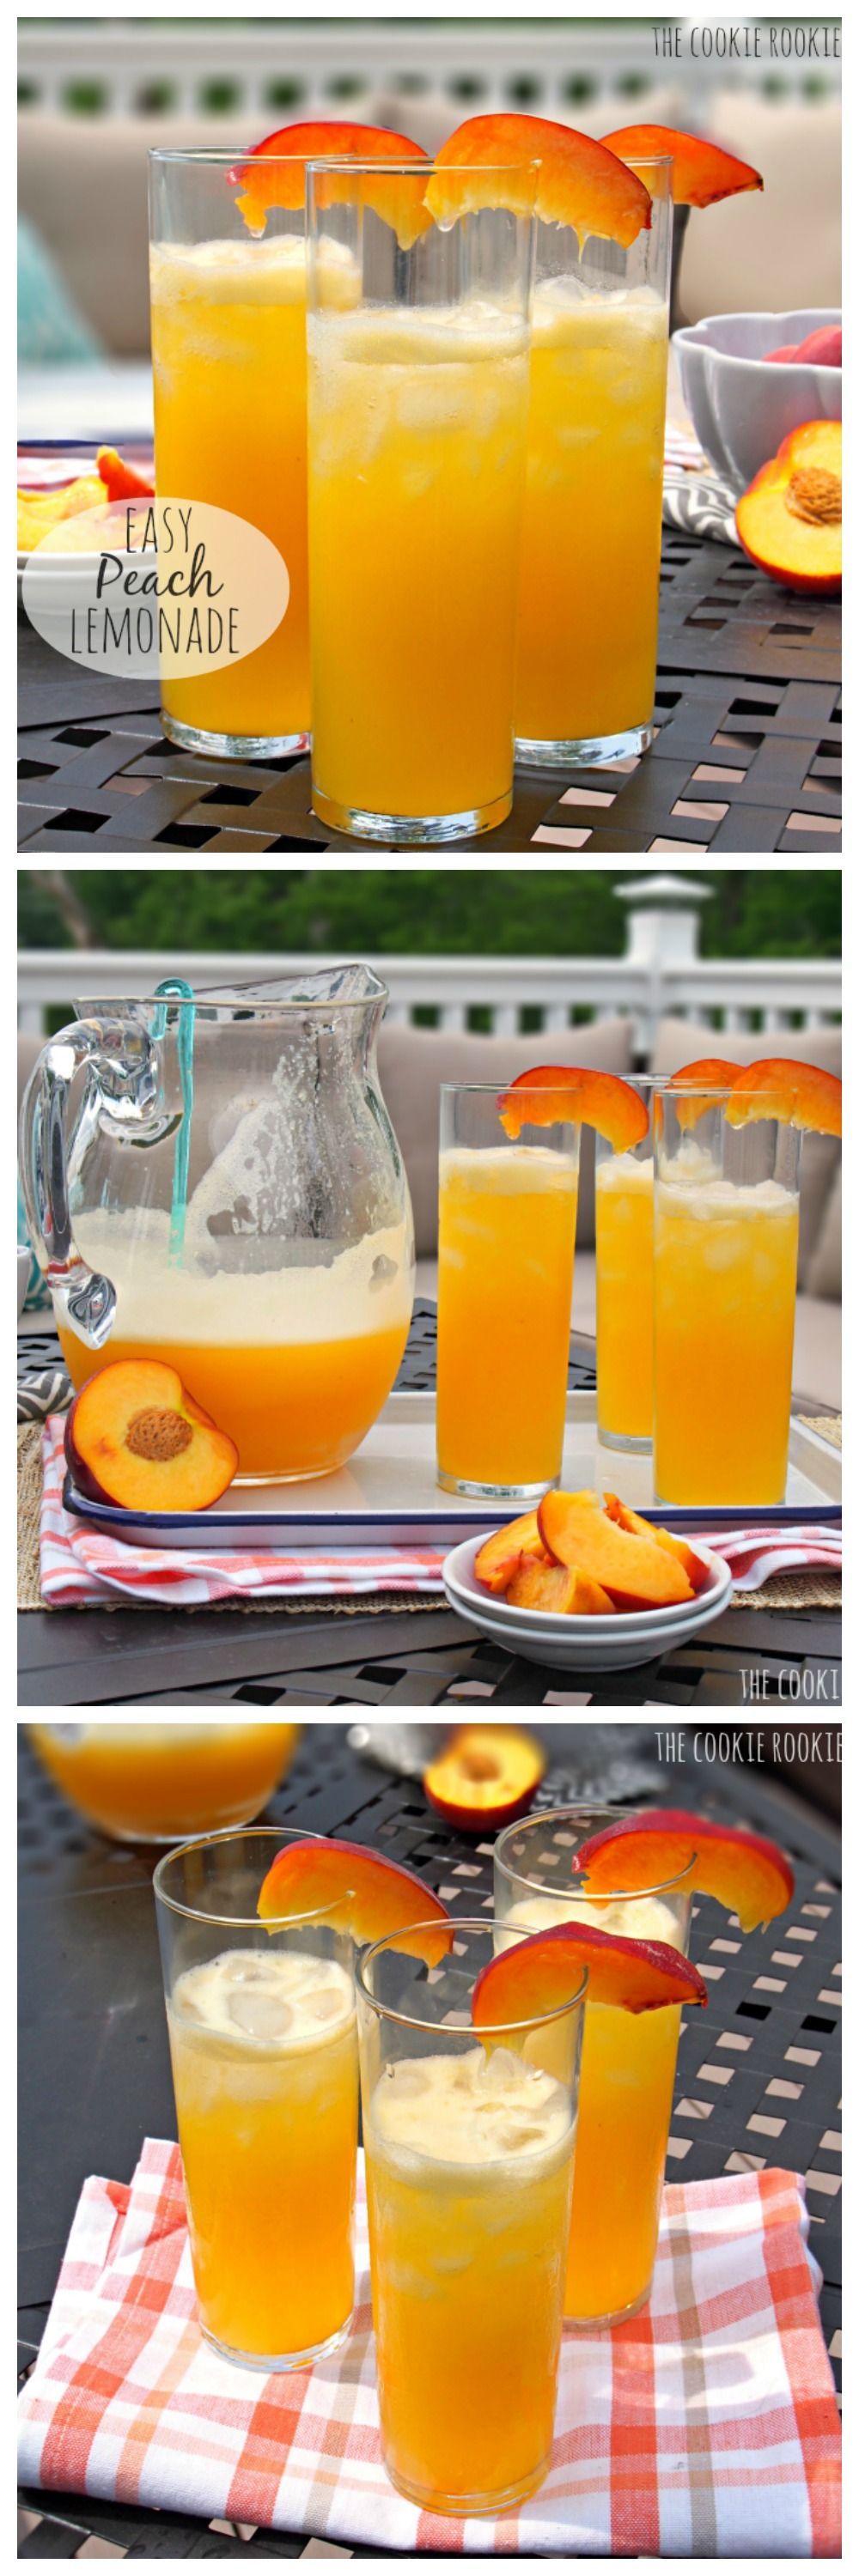 EASY PEACH LEMONADE! Only TWO ingredients.  Cocktail and Nonalcoholic versions. Favorite Summer Drink! – The Cookie